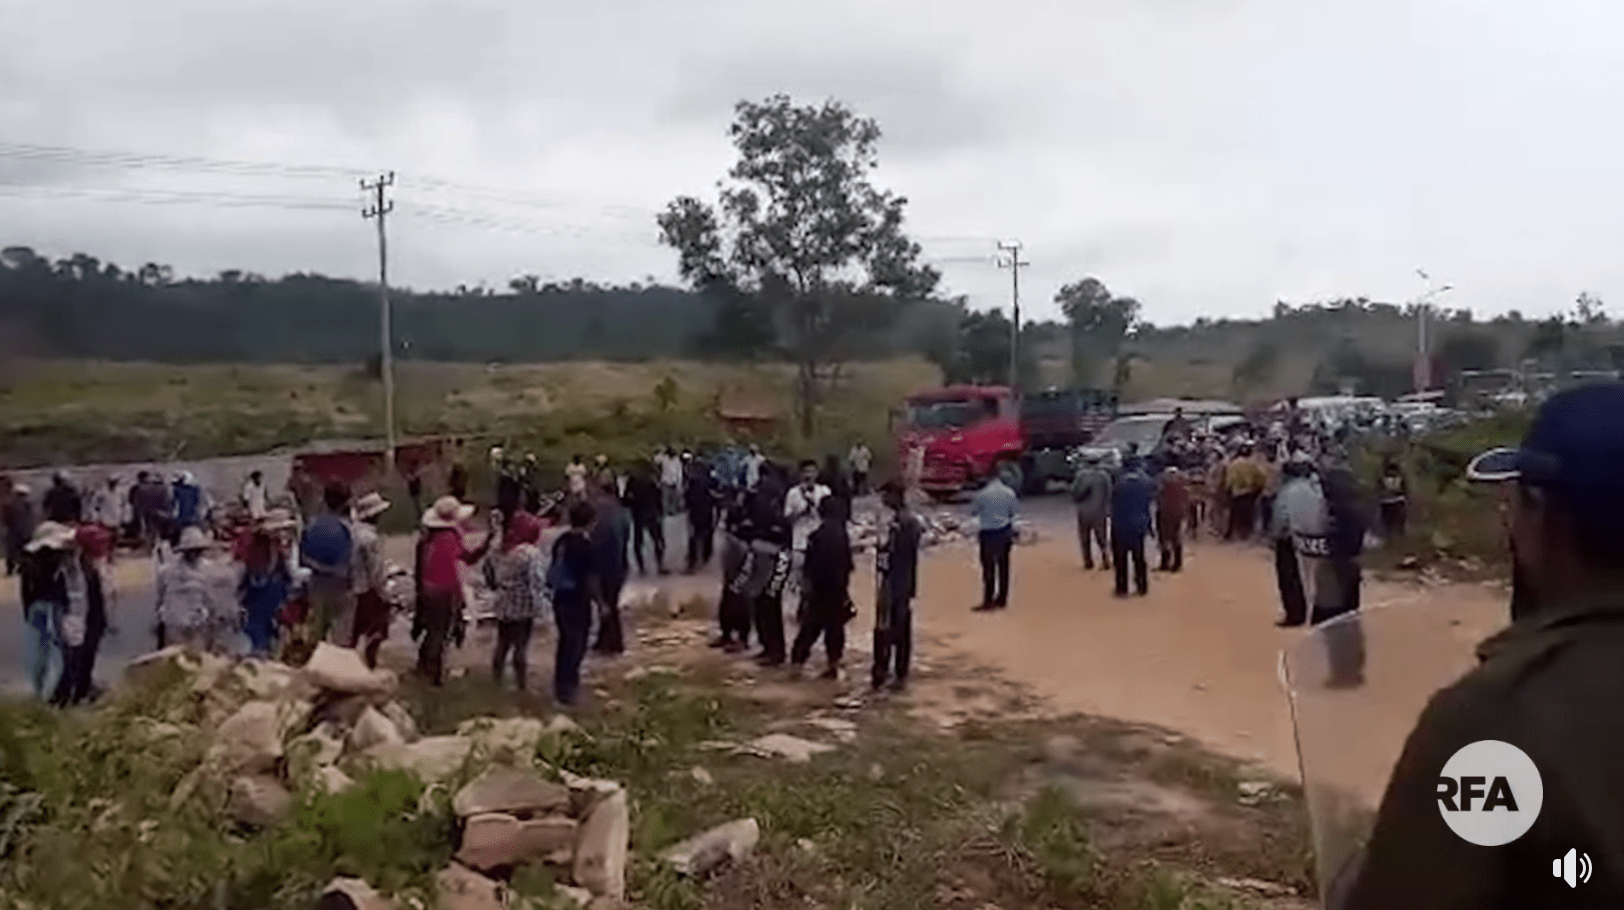 WATCH: A violent clash erupts over evictions in southern Cambodia